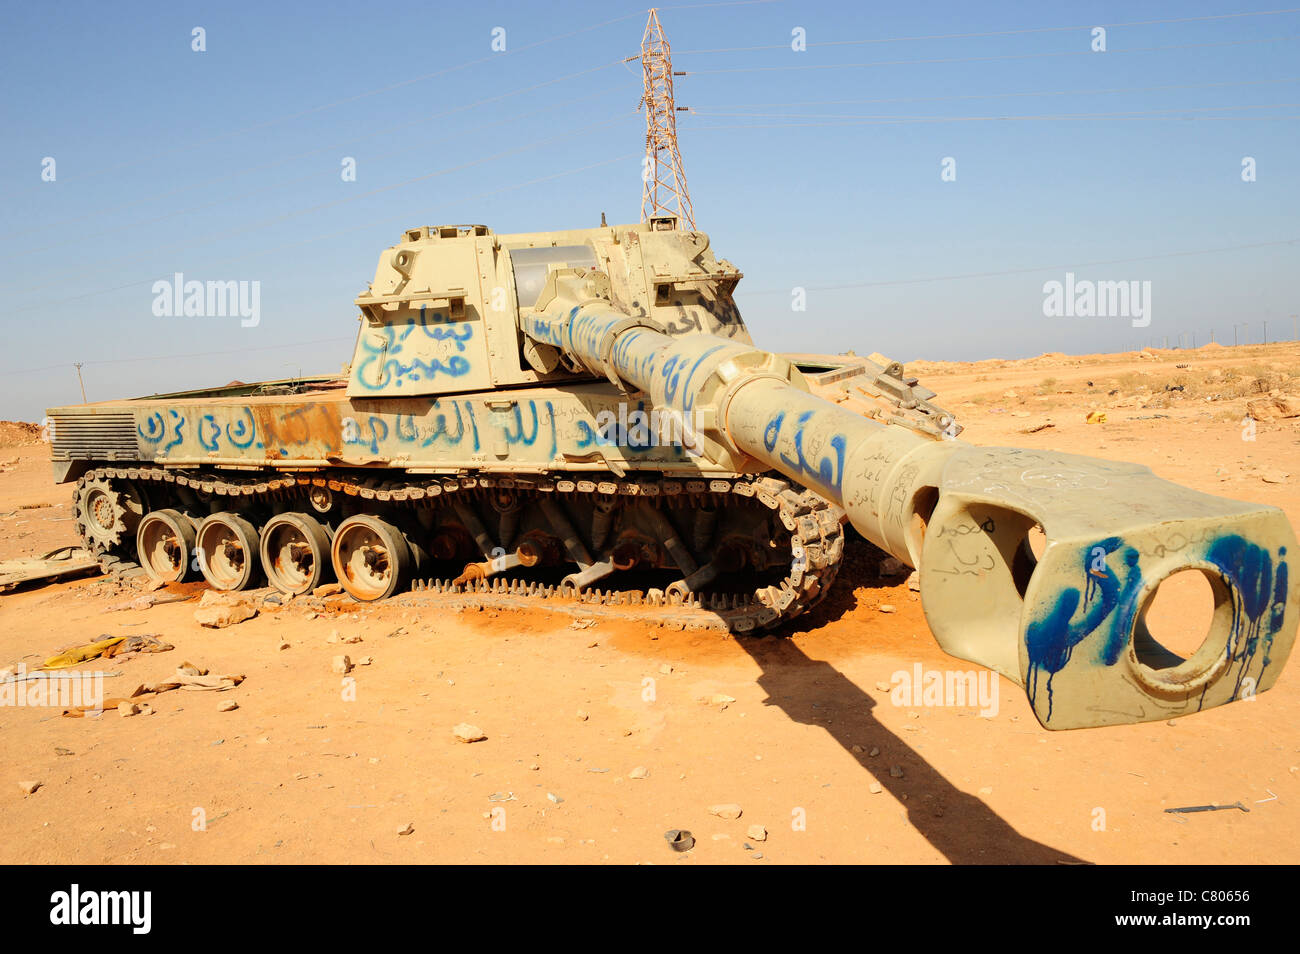 A M109 howitzer destroyed by NATO forces in the desert outside Benghazi, Libya. Stock Photo